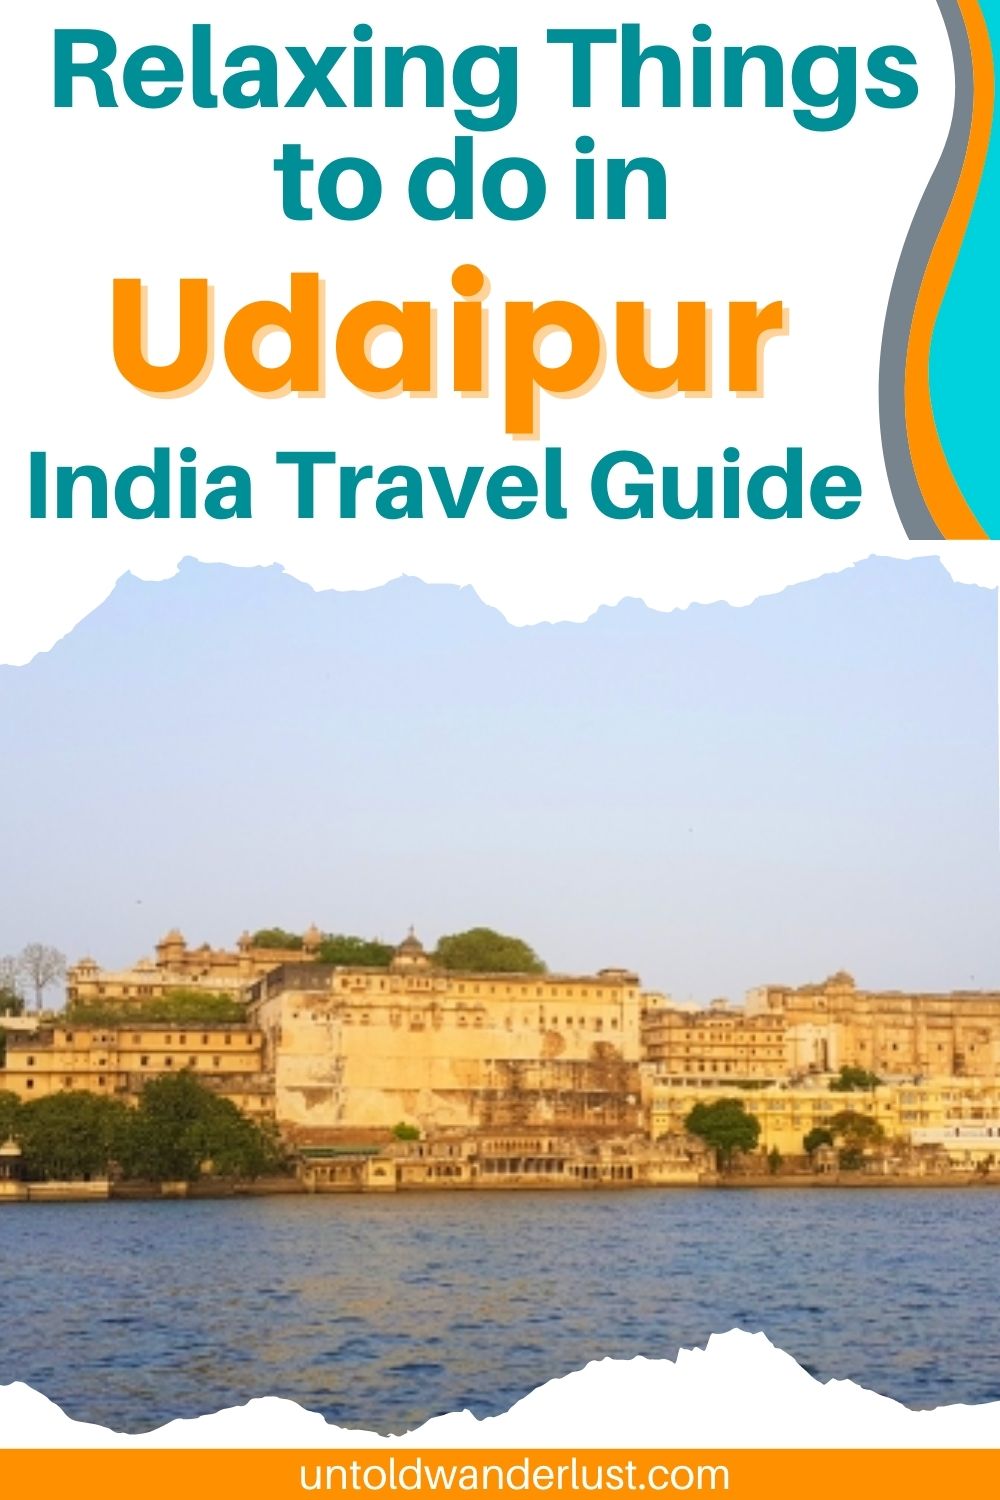 Relaxing Things to do in Udaipur, India